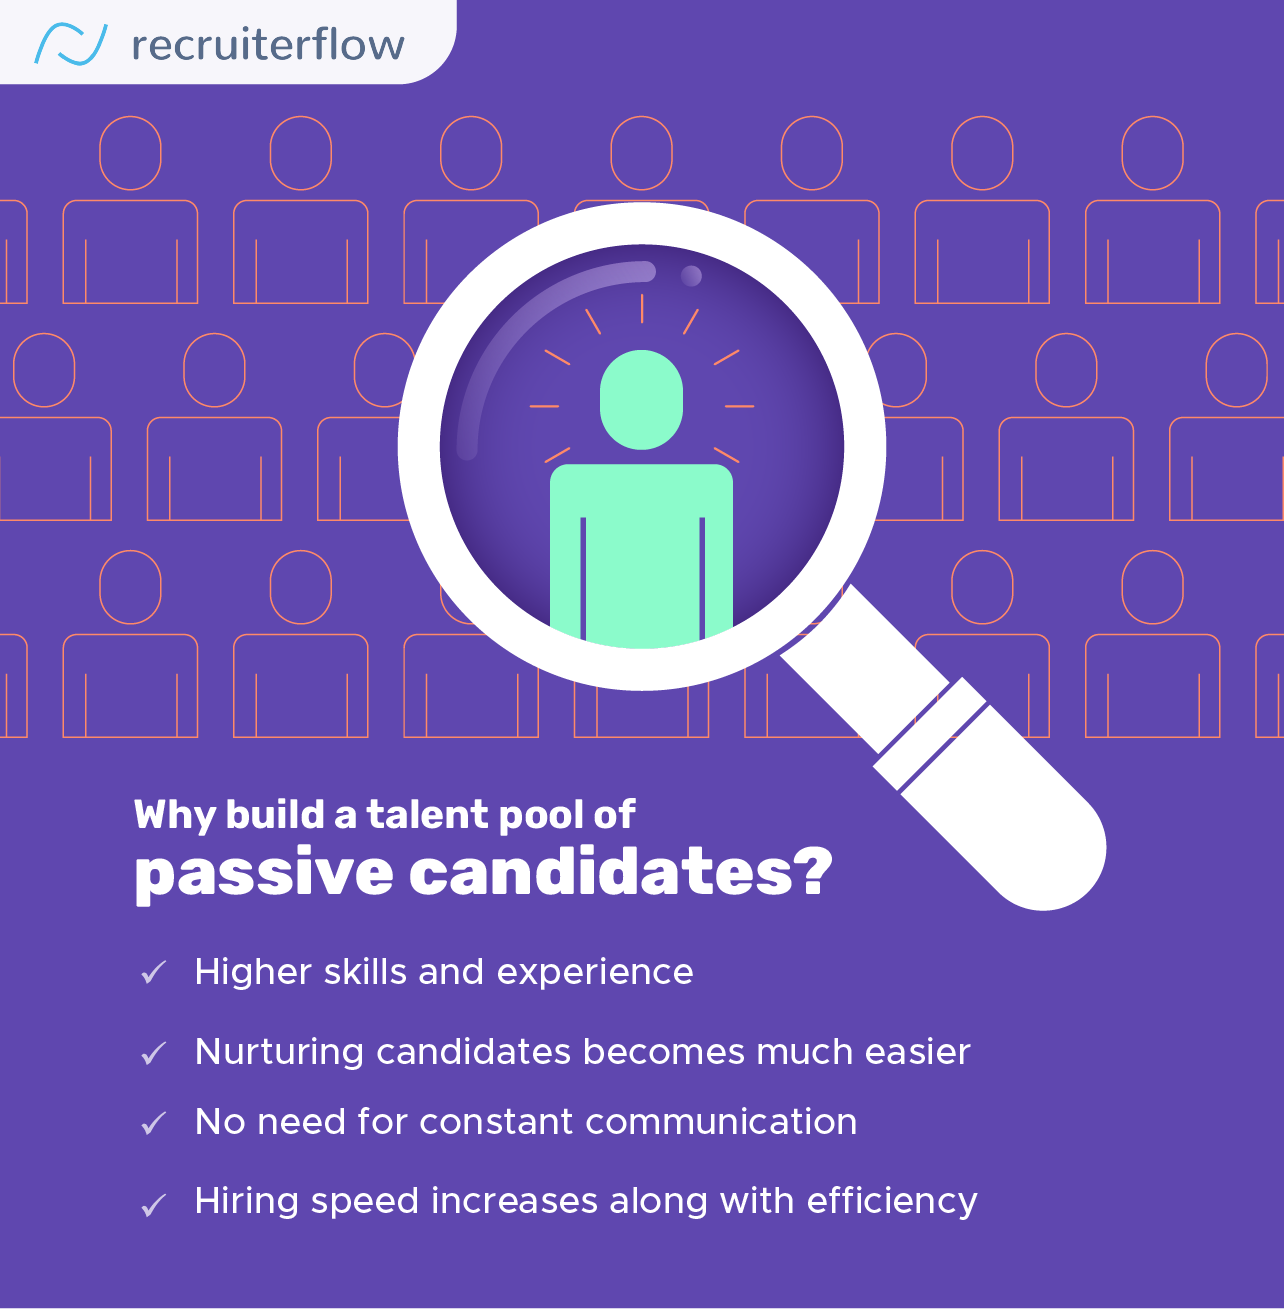 Why build a talent pool of passive candidates?